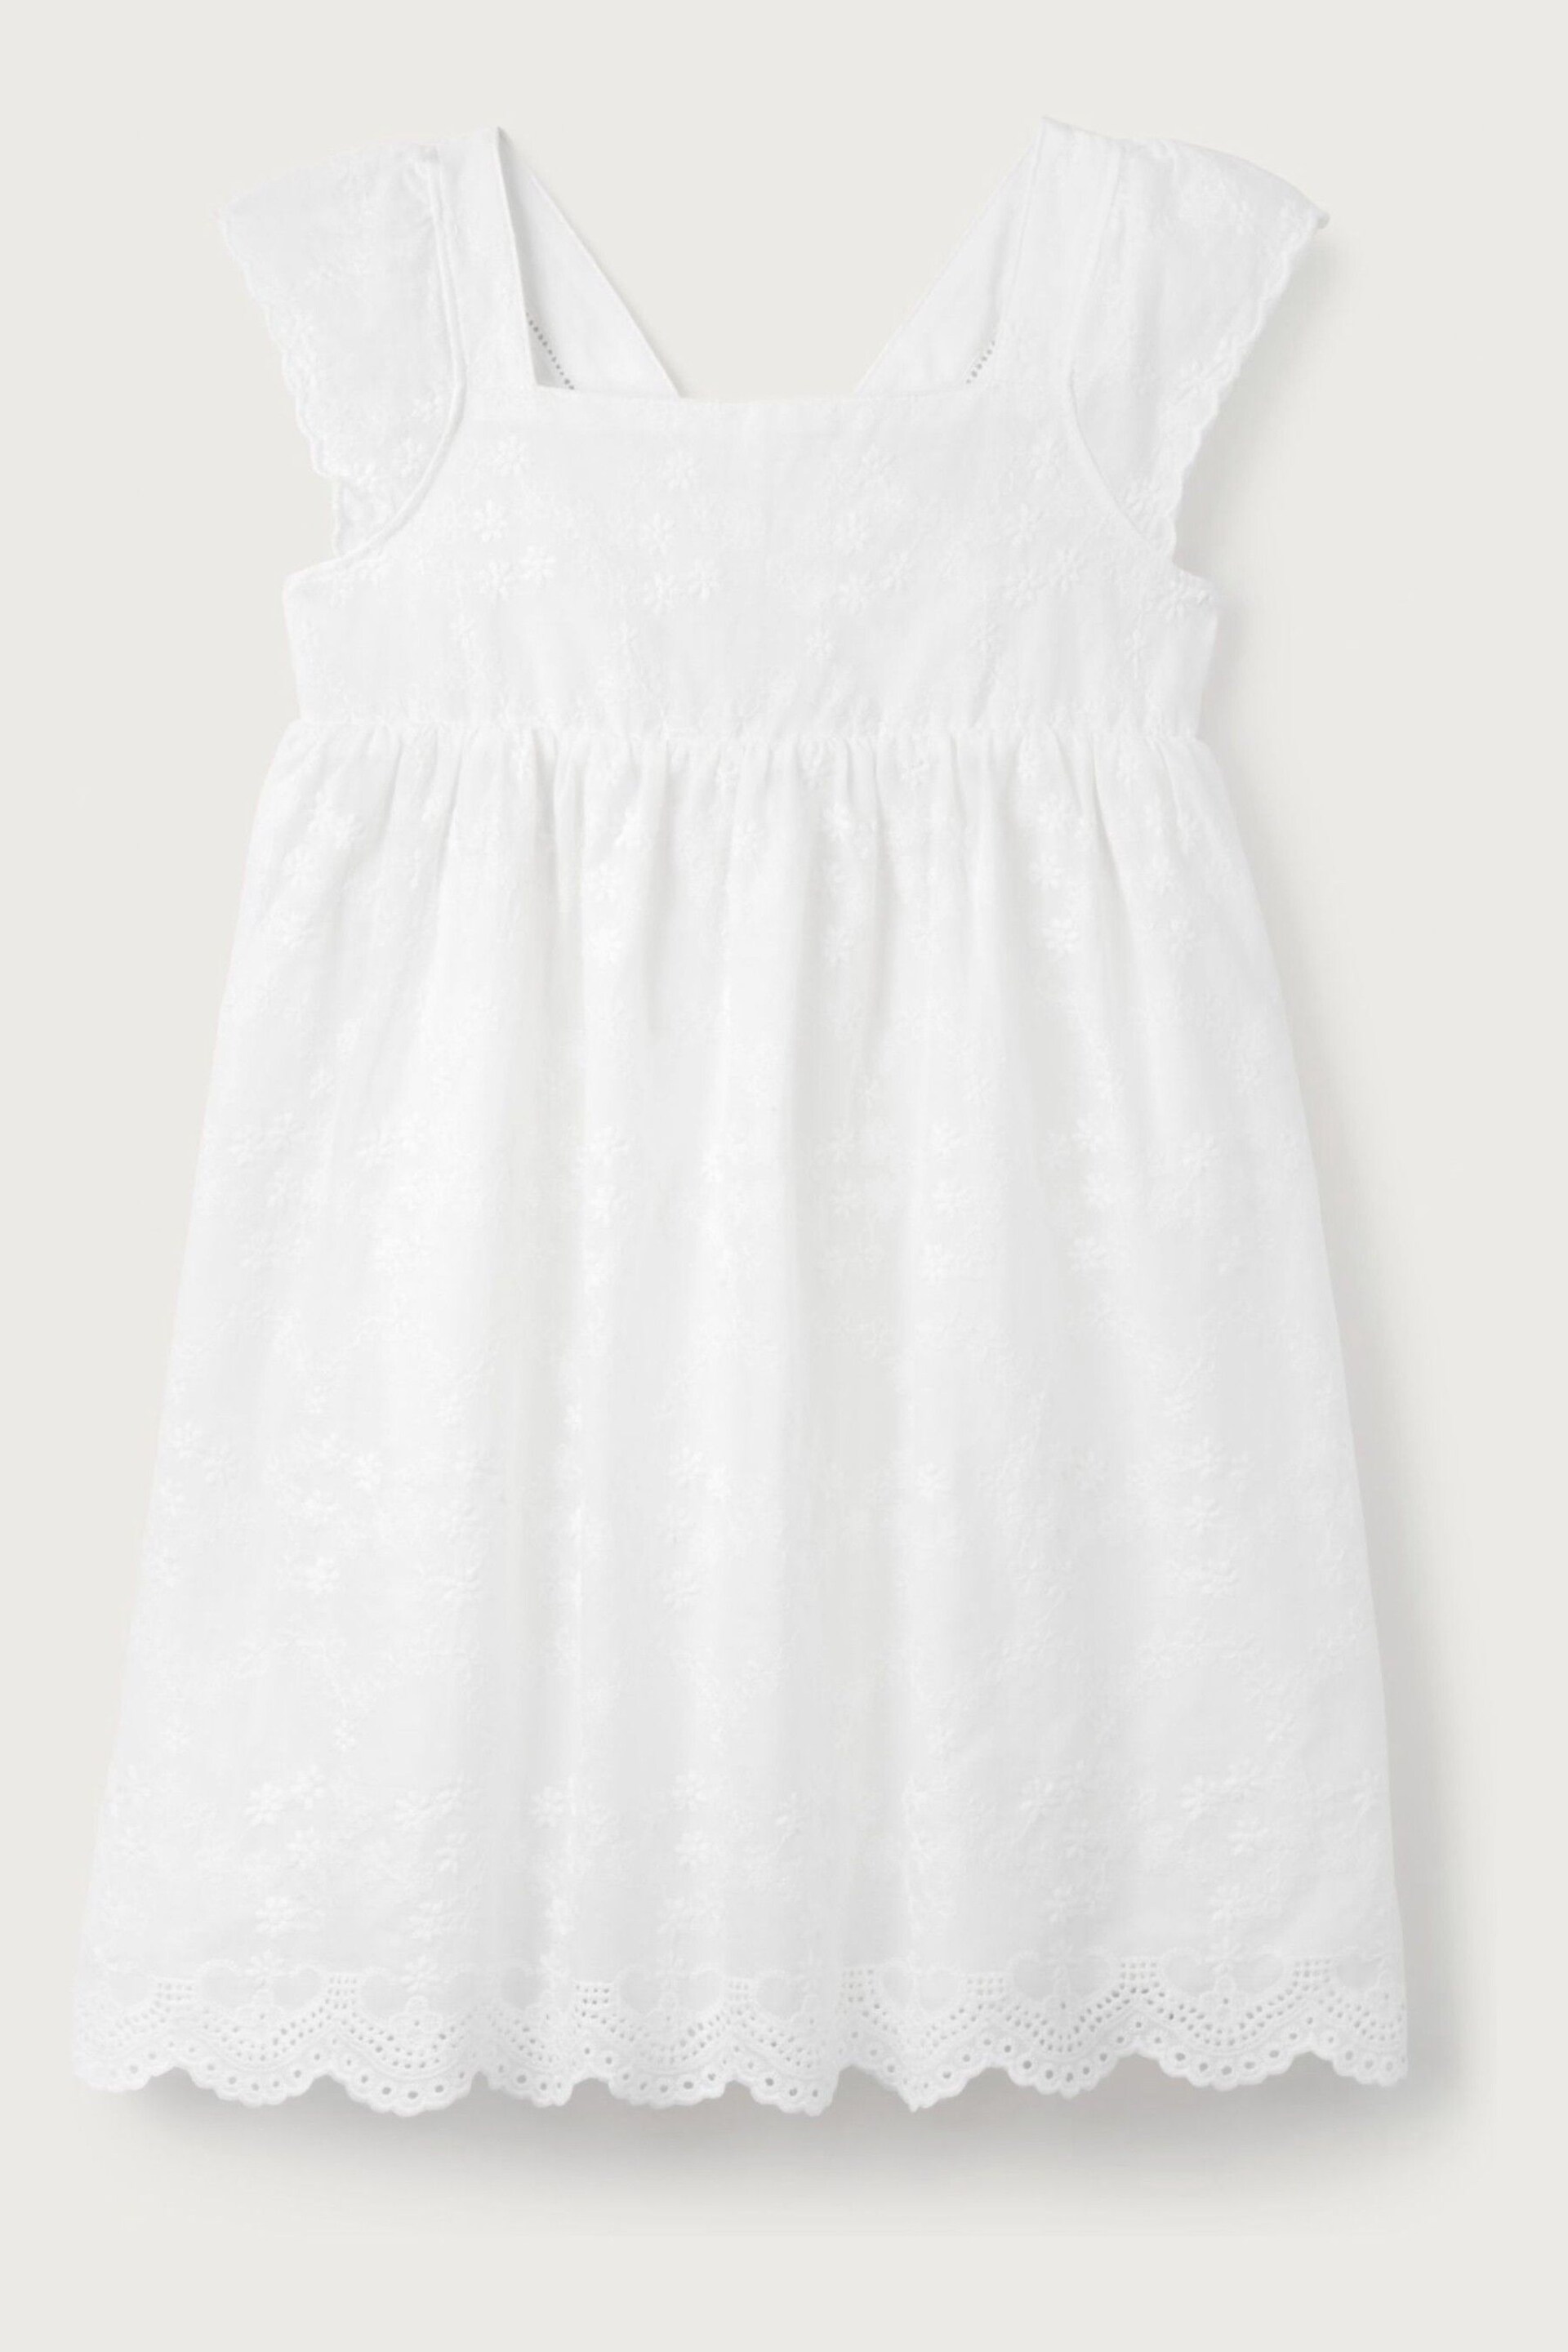 The White Company Cotton Broderie White Dress - Image 9 of 12